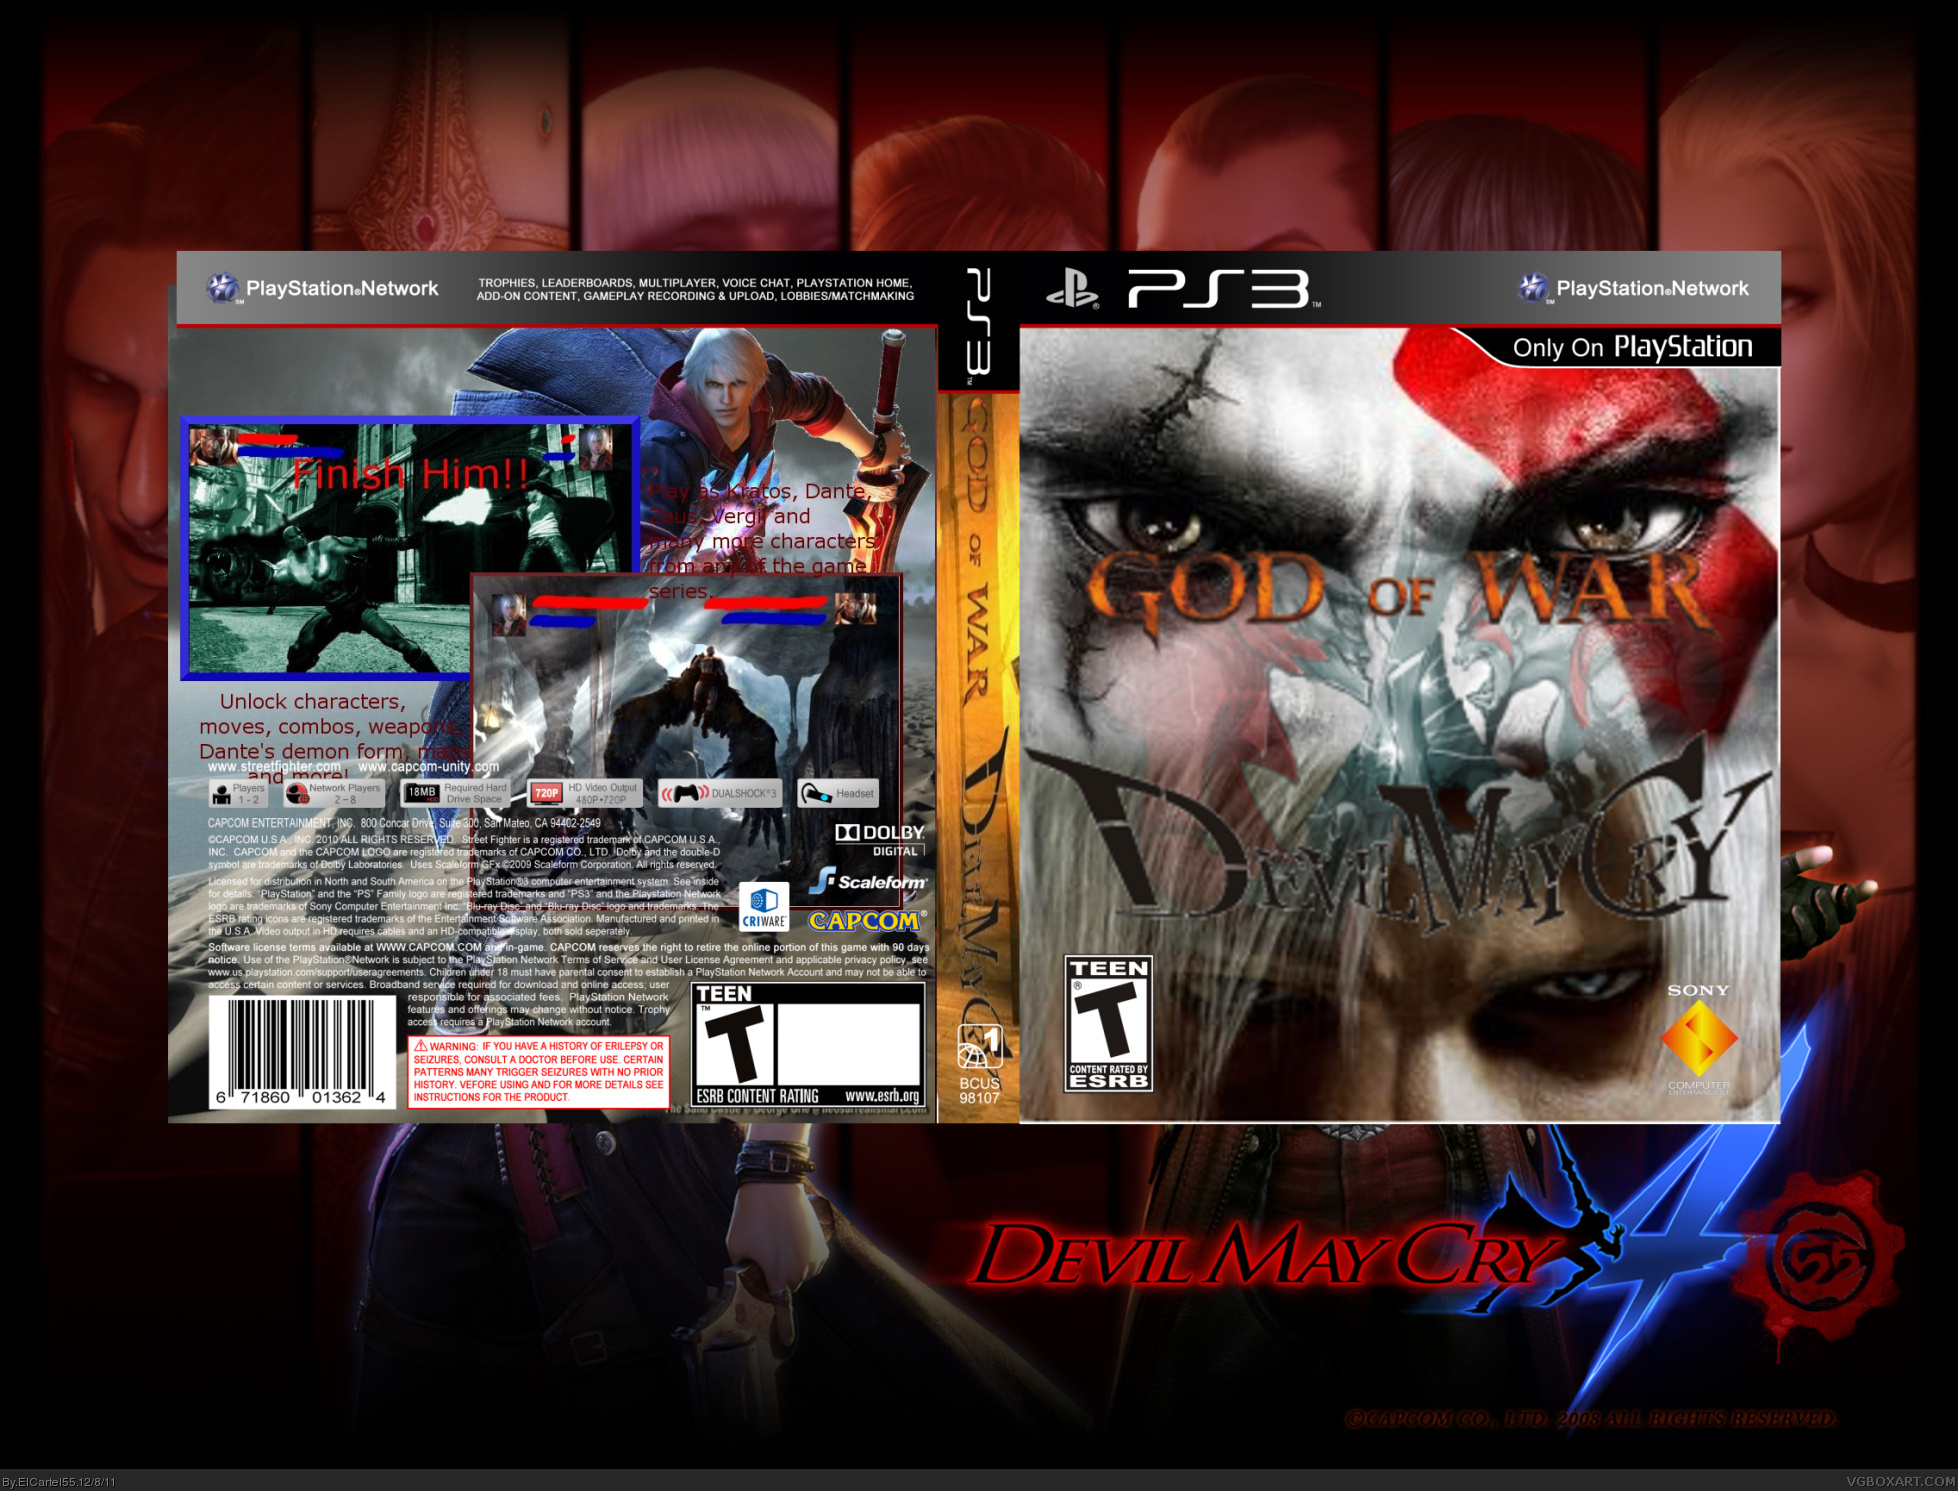 God of War vs. Devil May Cry box cover